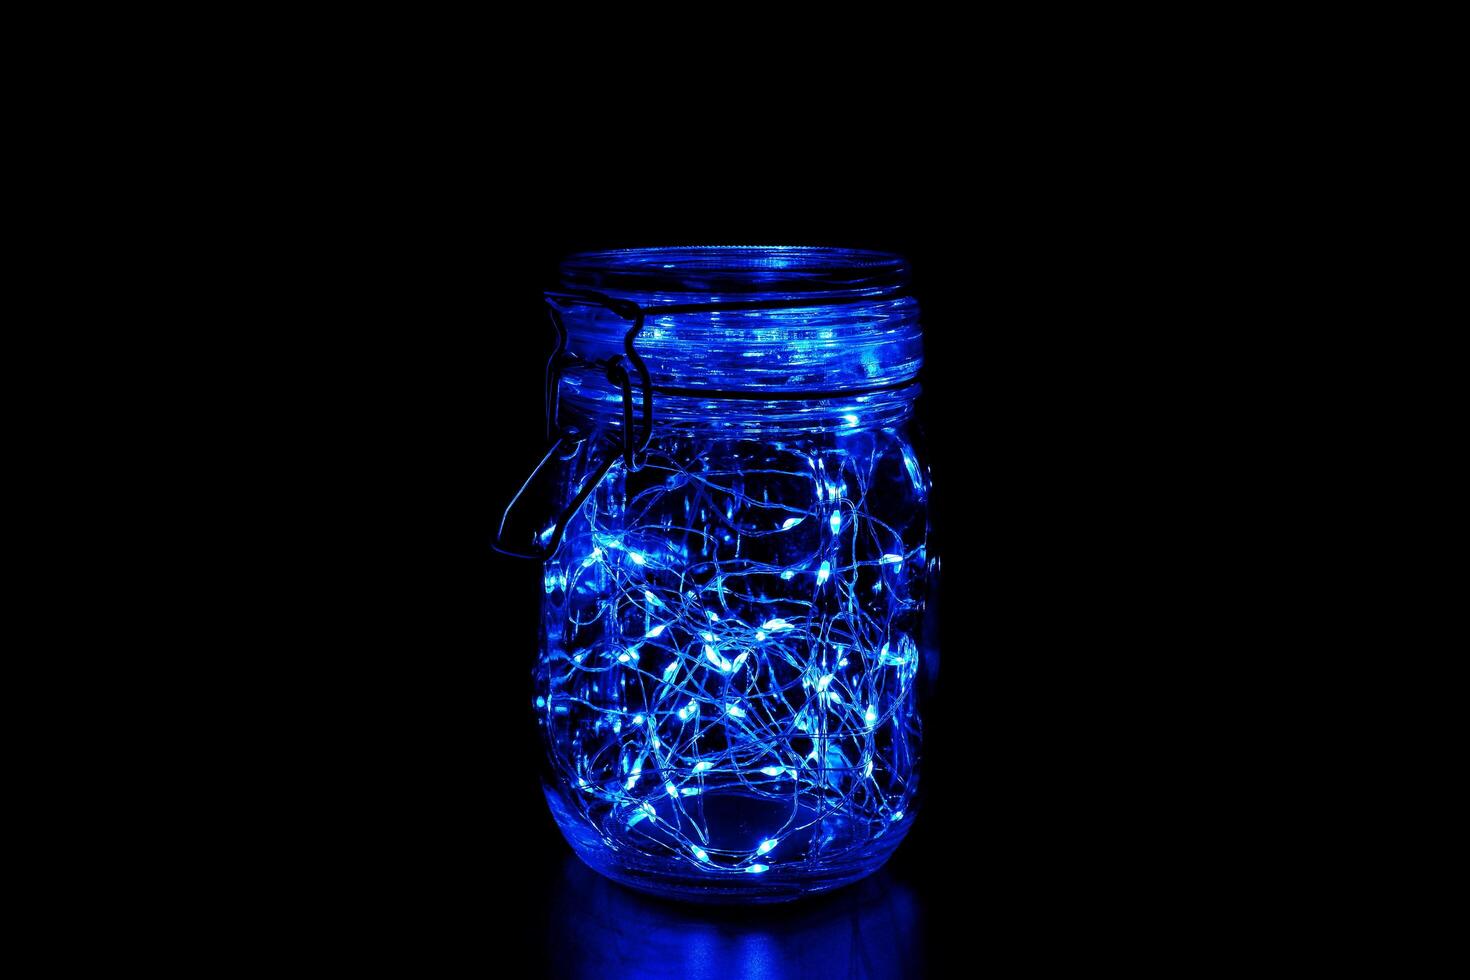 Blue fairy light in a glass jar, in the dark, low-key photography photo